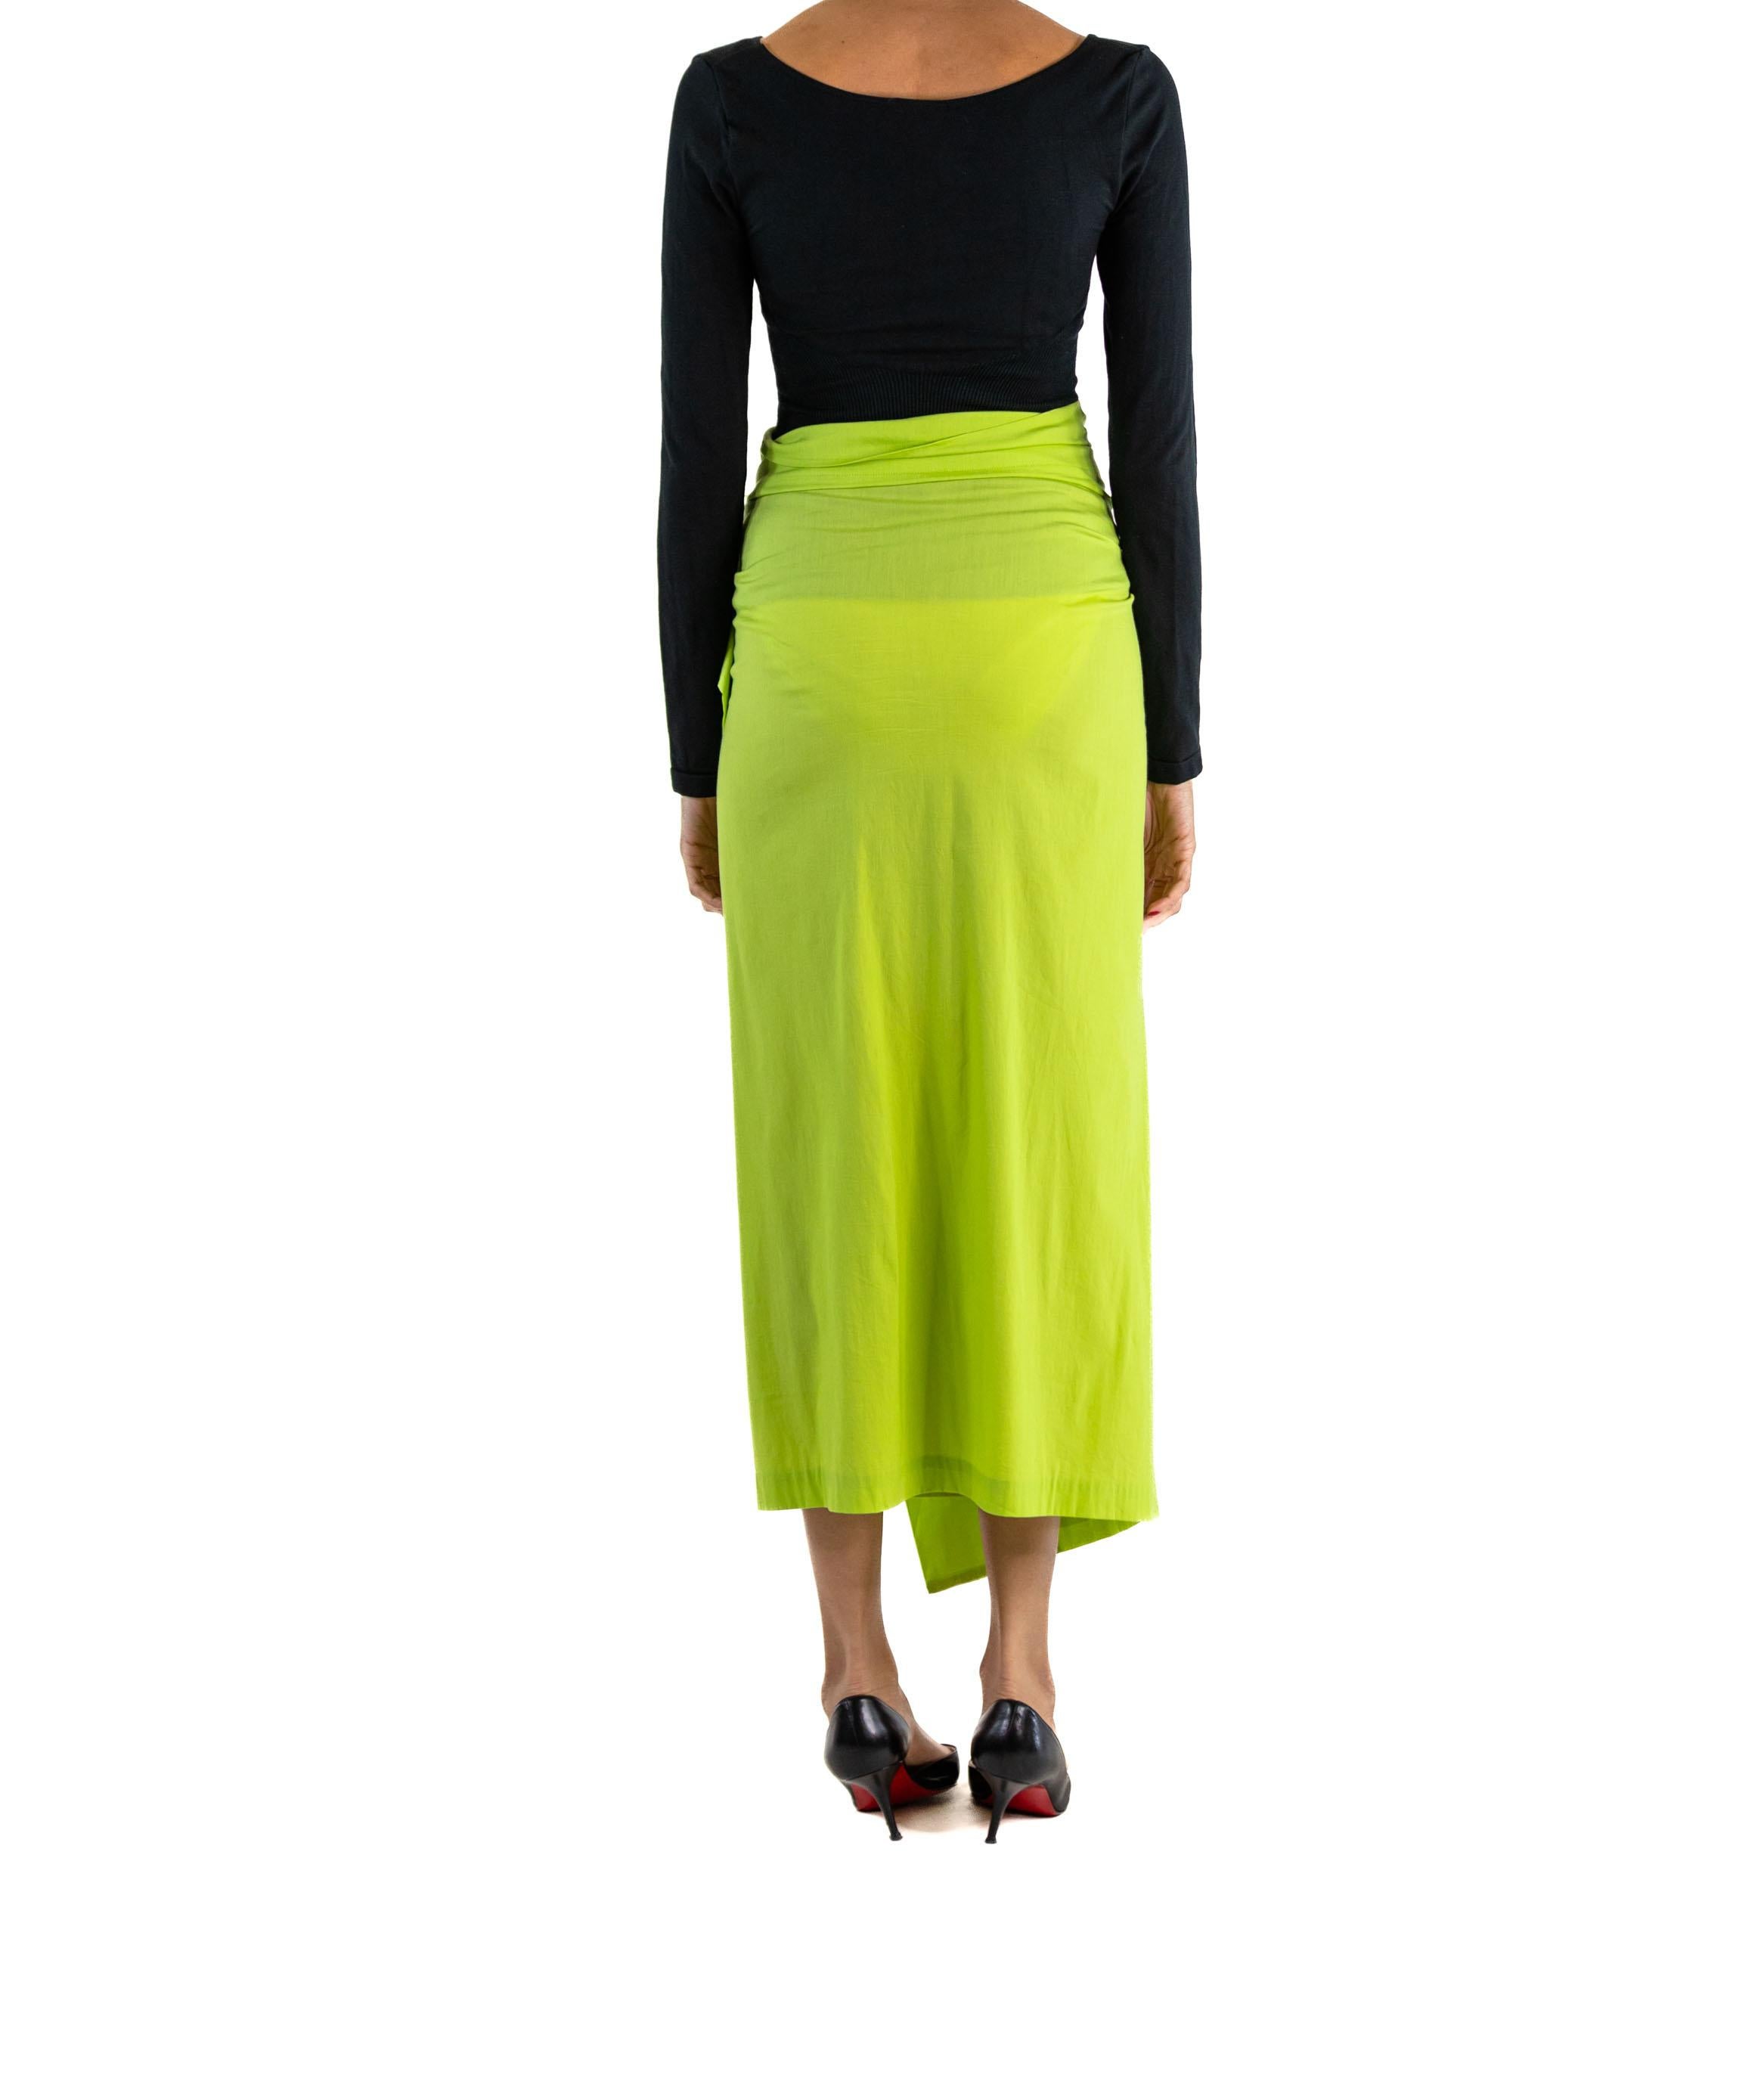 1990S ISSEY MIYAKE Lime Green & Black Rayon Blend Scoop Neck Top Skirt Ensemble For Sale 4